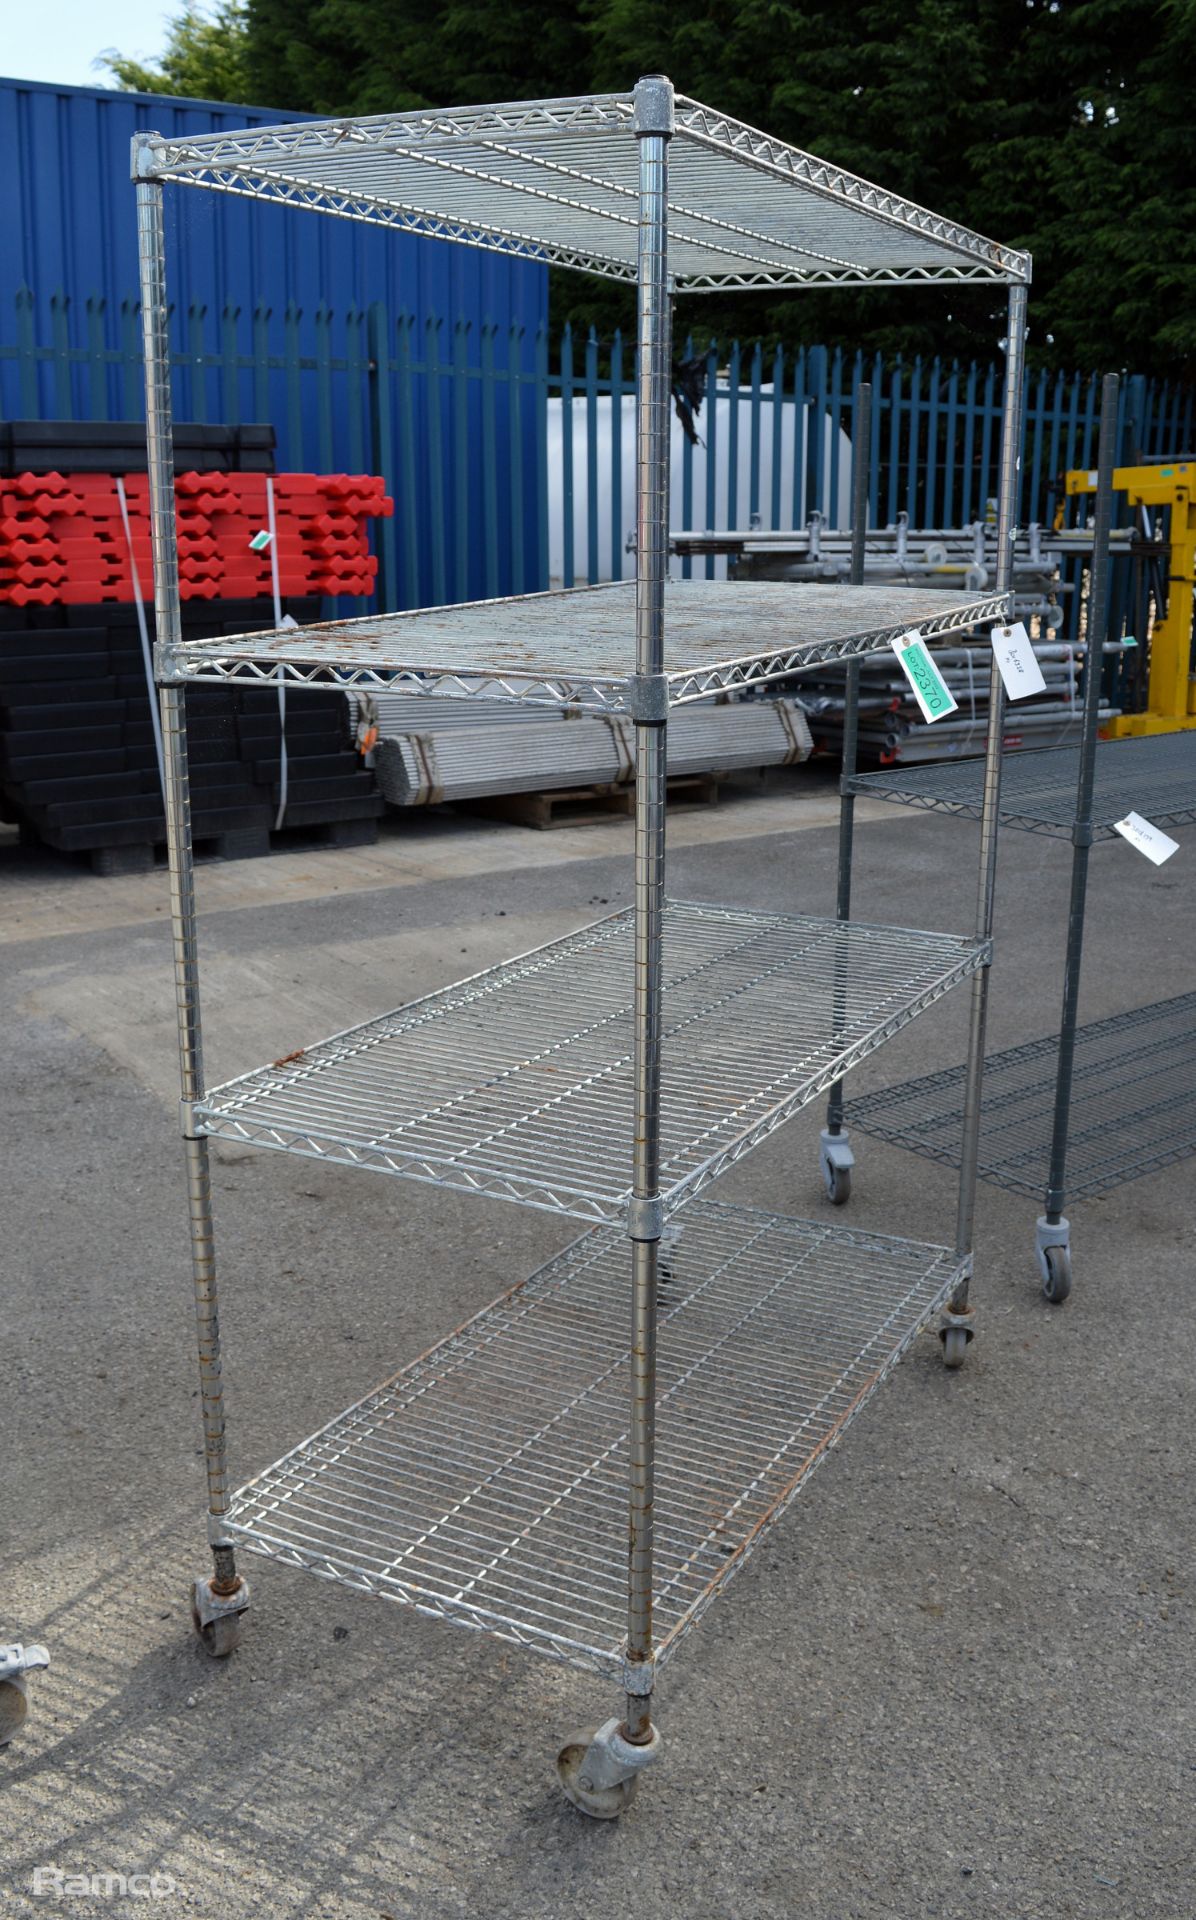 Stainless steel 4 tier wire racking L120 X W50 x H178cm - Image 3 of 3